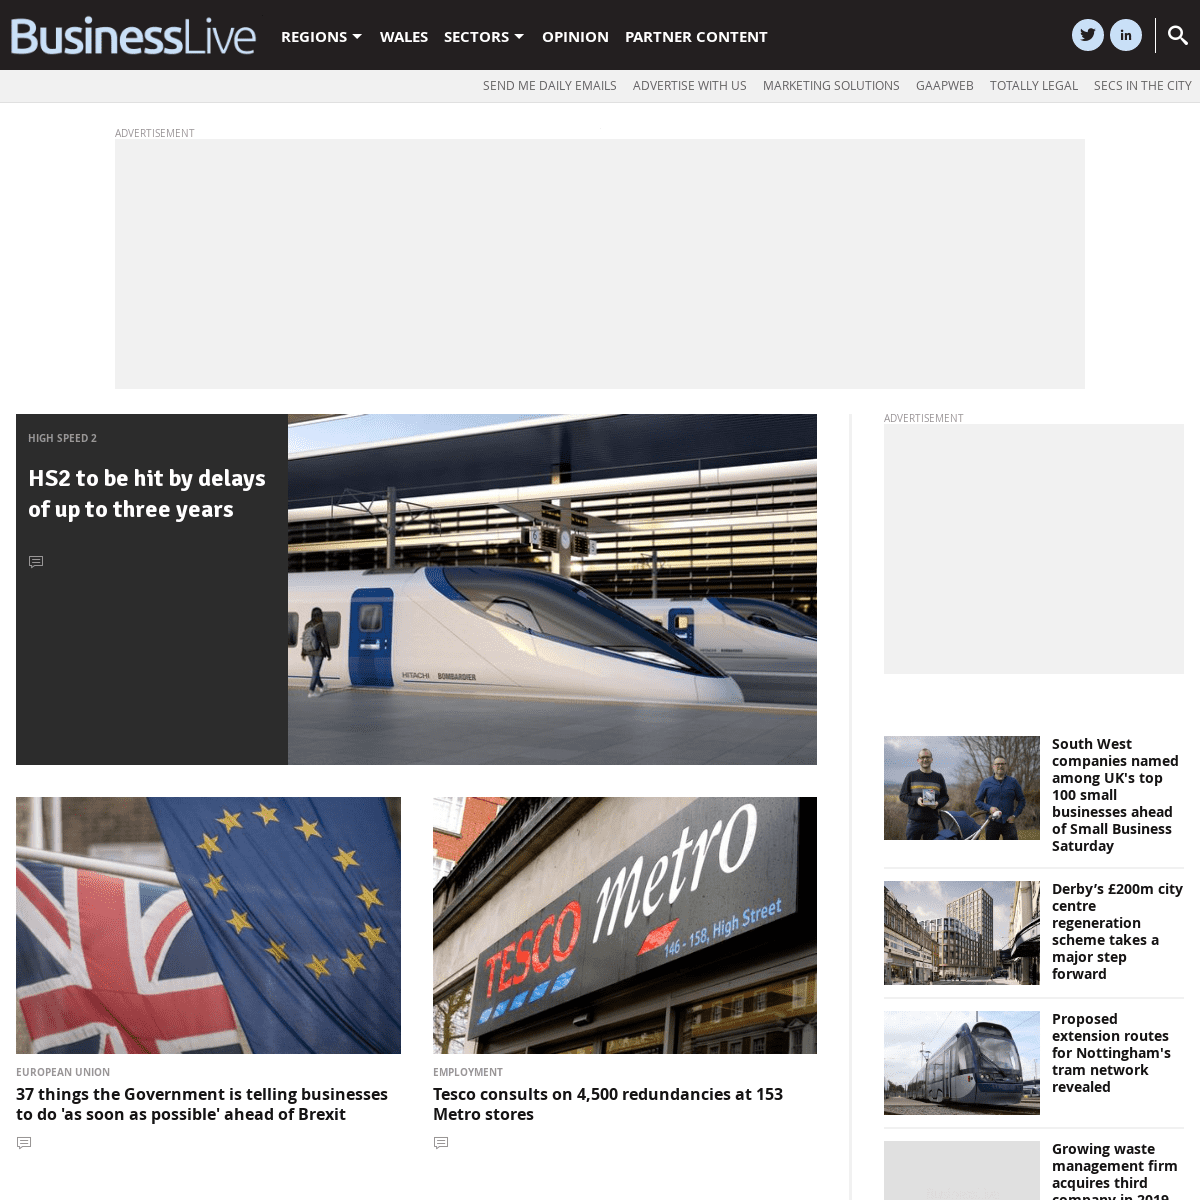 Business Live - UK Business news, analysis & Thought Leadership